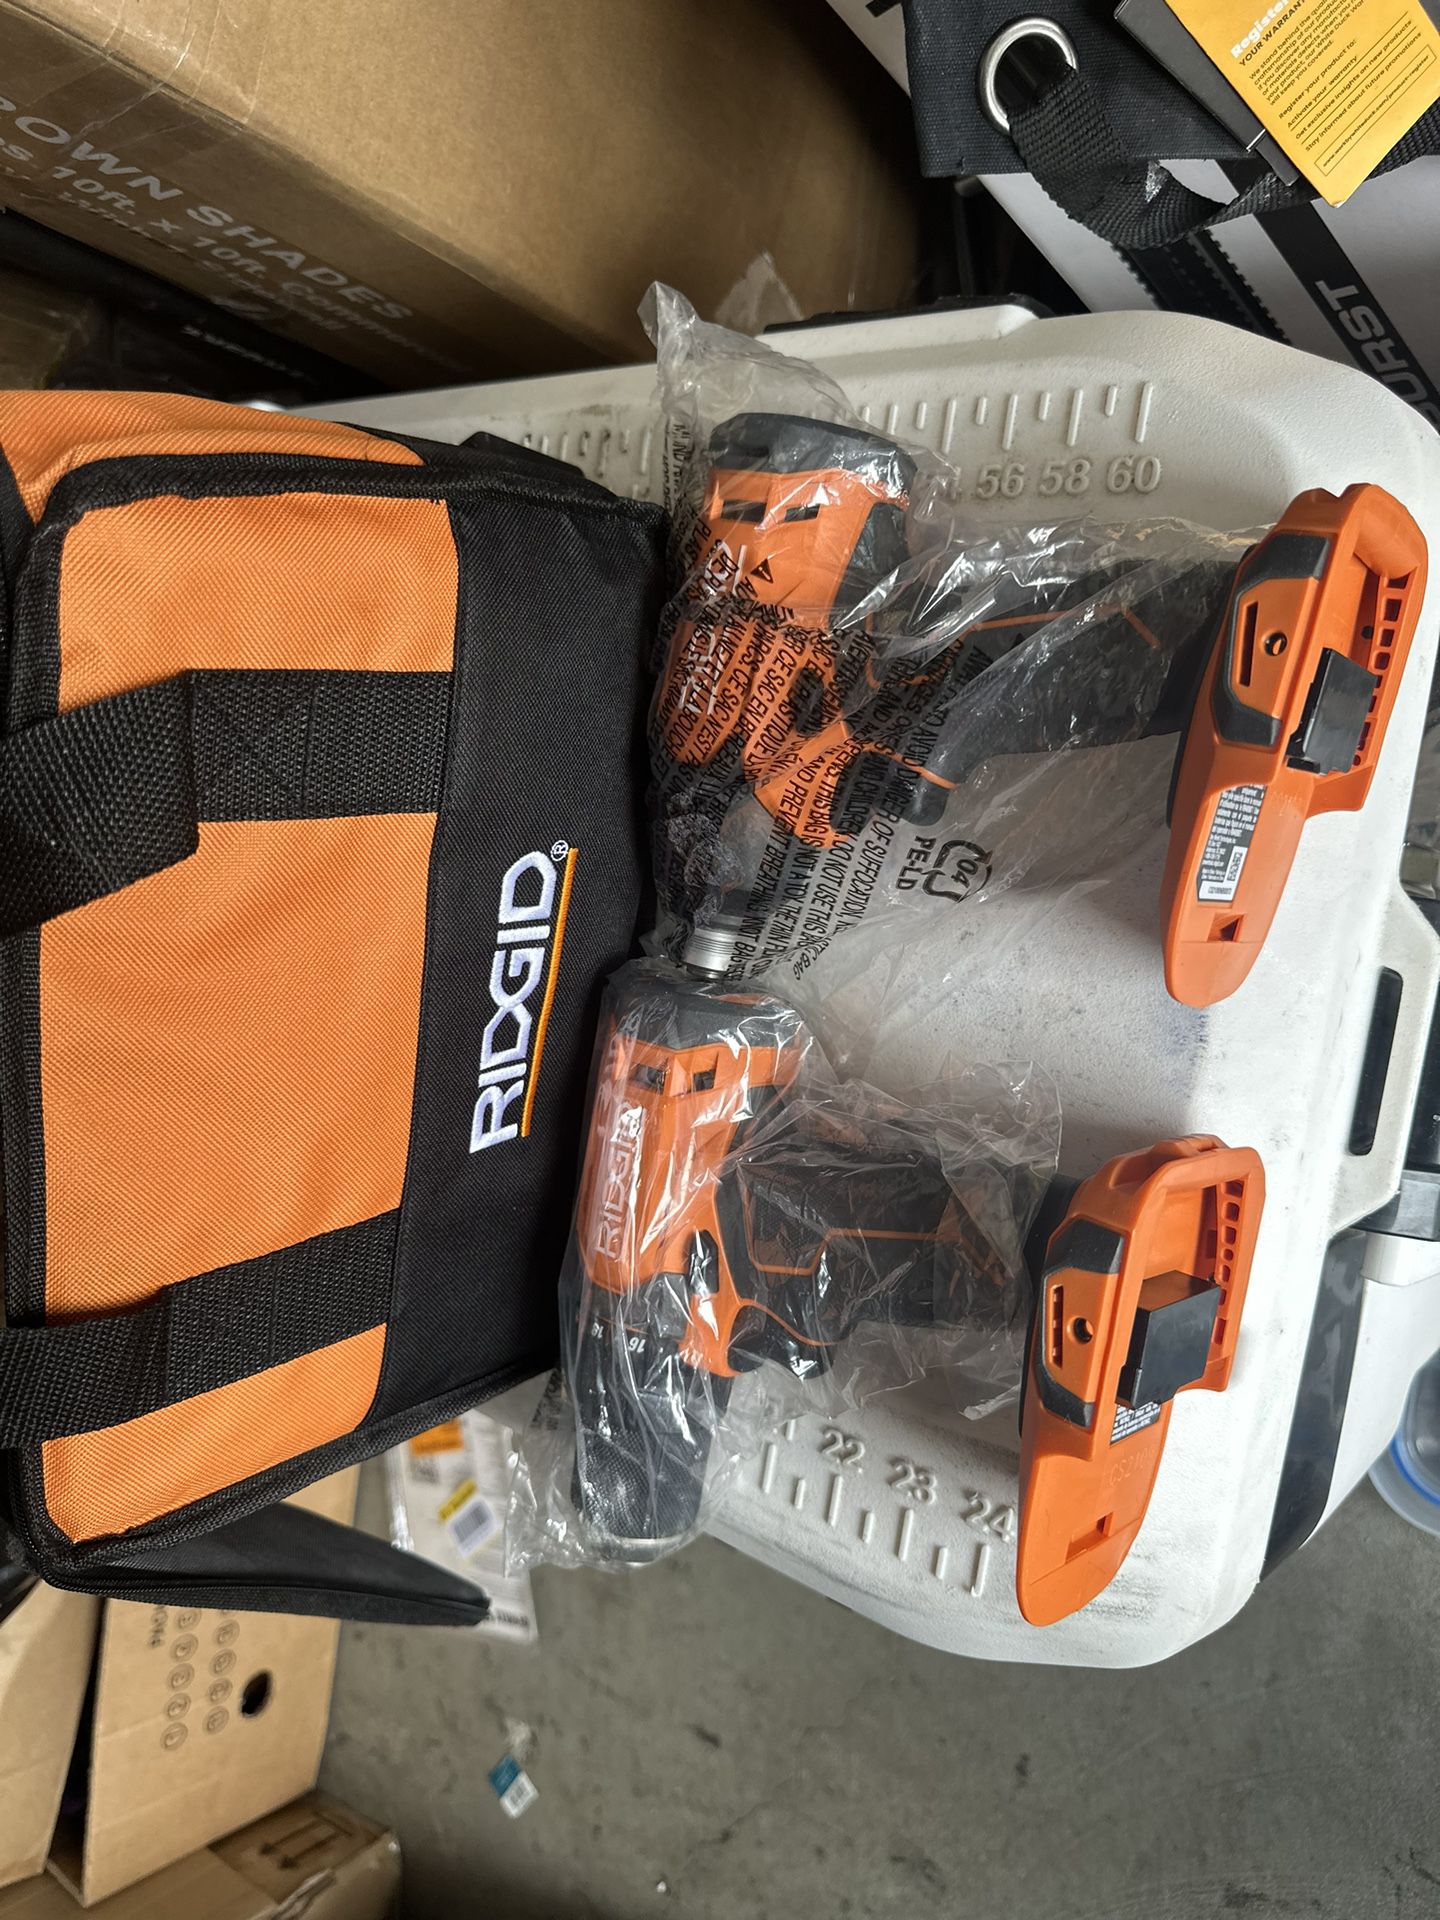 Drill Combo Ridgid Brand New Complete With Battery And Charger $150